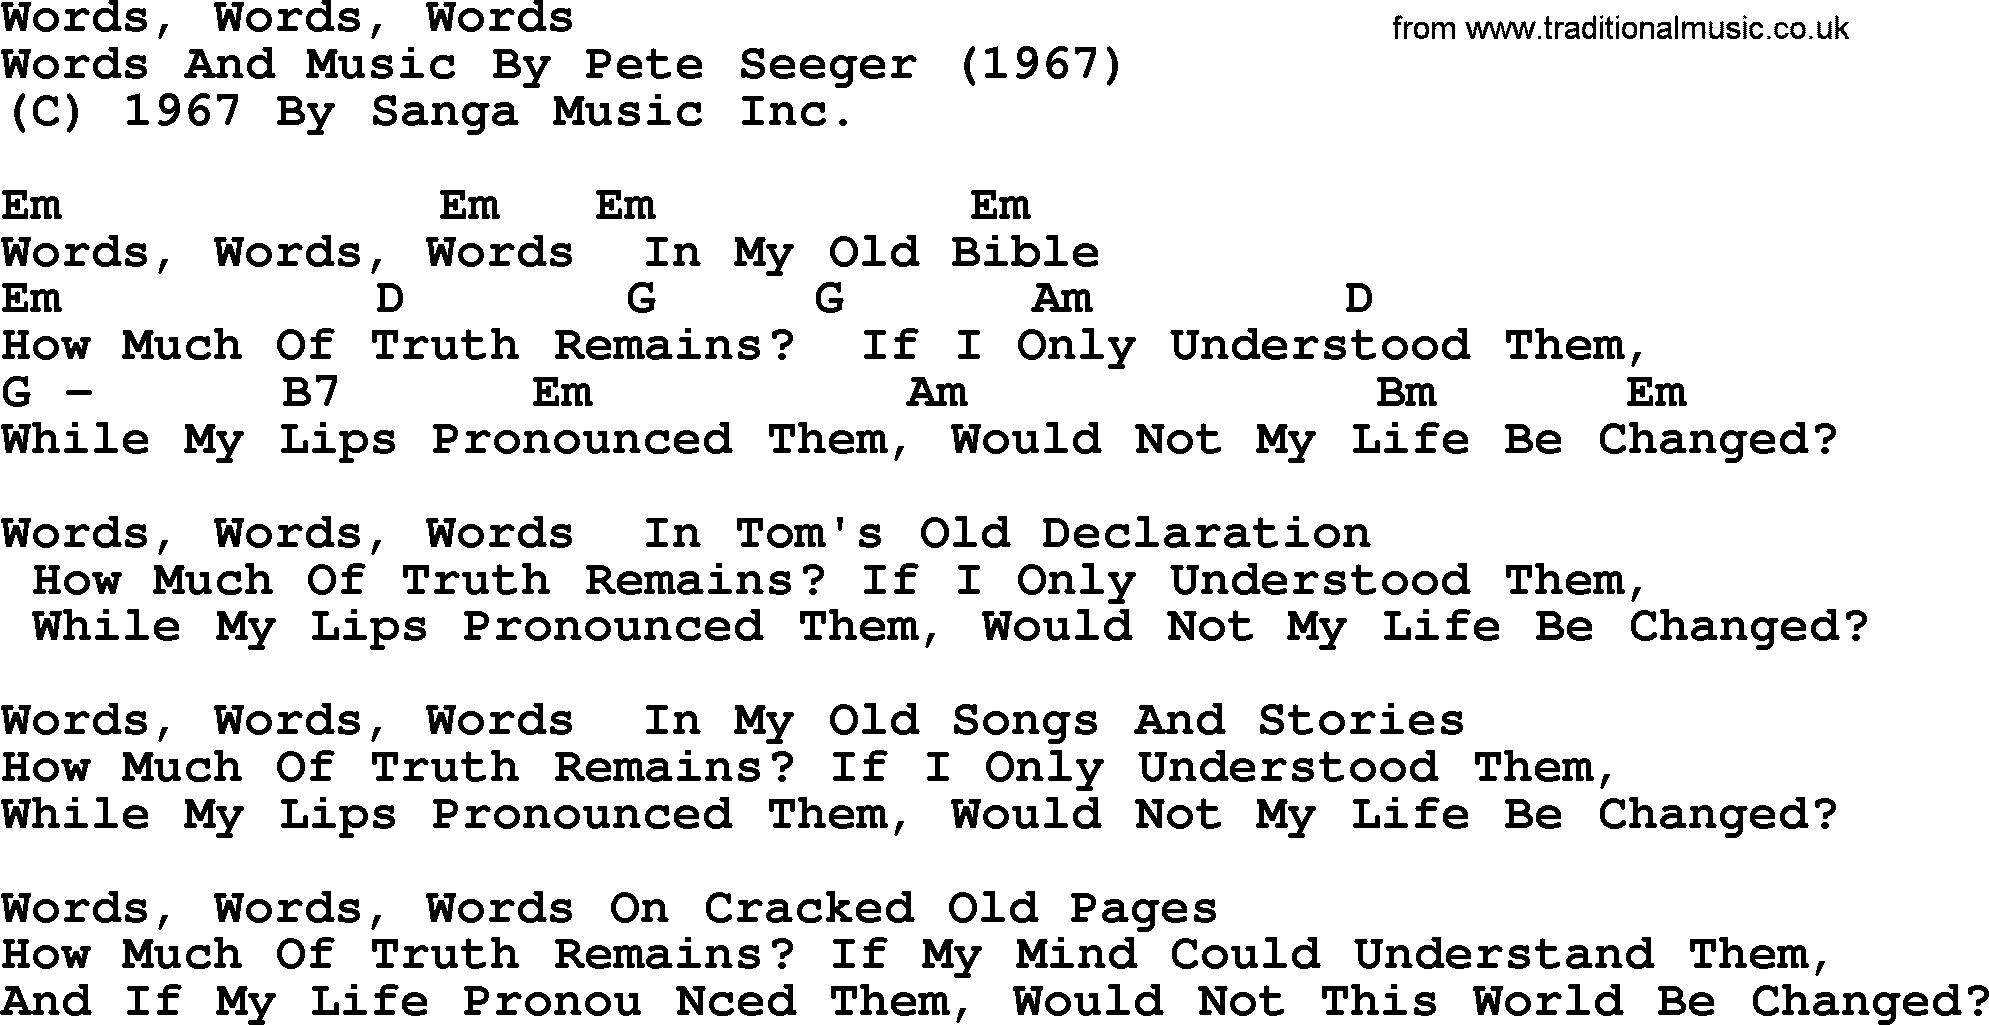 Pete Seeger song Words Words Words, lyrics and chords